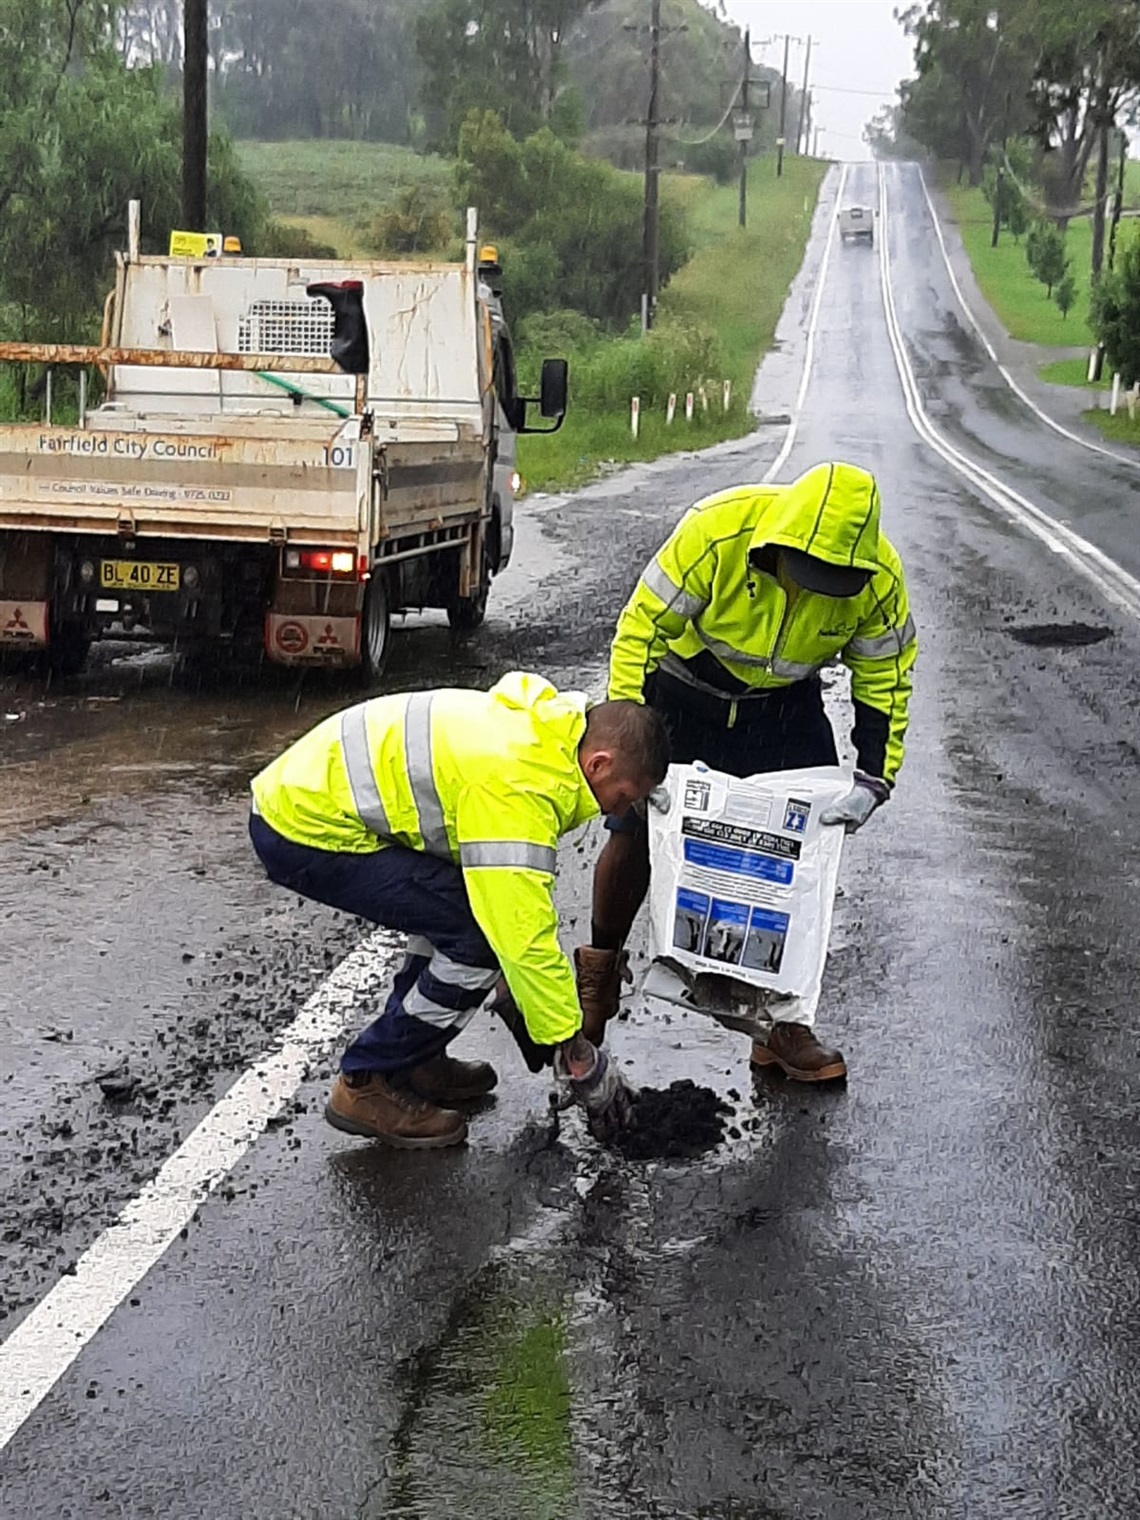 Two men wearing high visibility jackets filling in pot hole on the road  